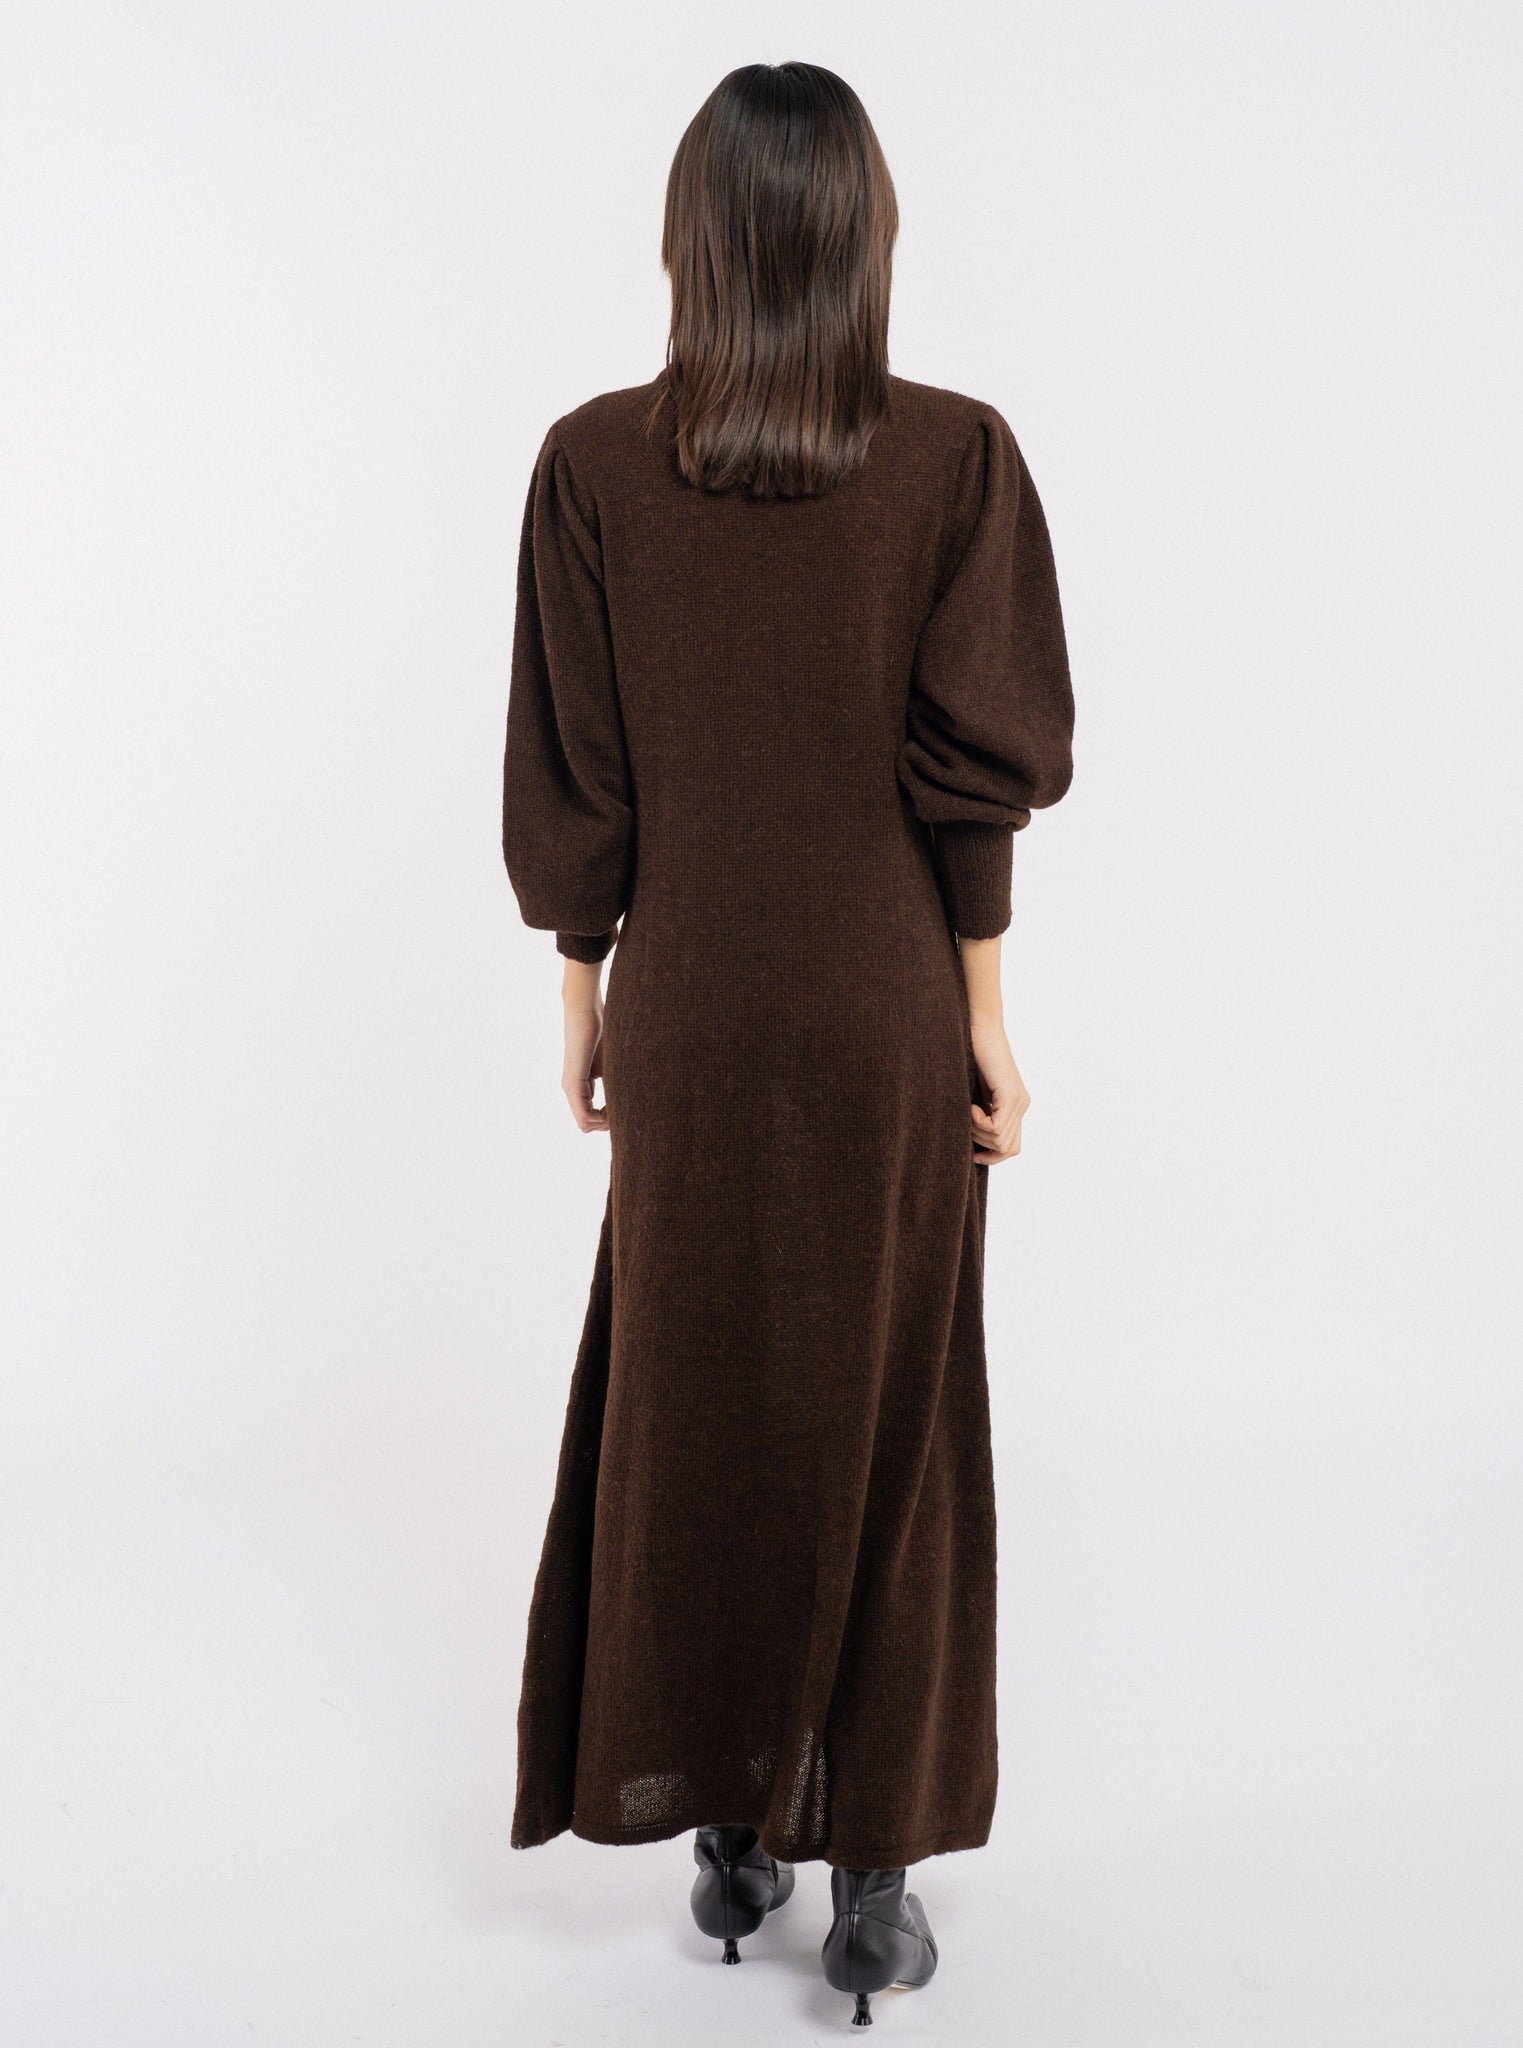 The back view of a woman wearing an Ennis Dress - Mustang Brown.